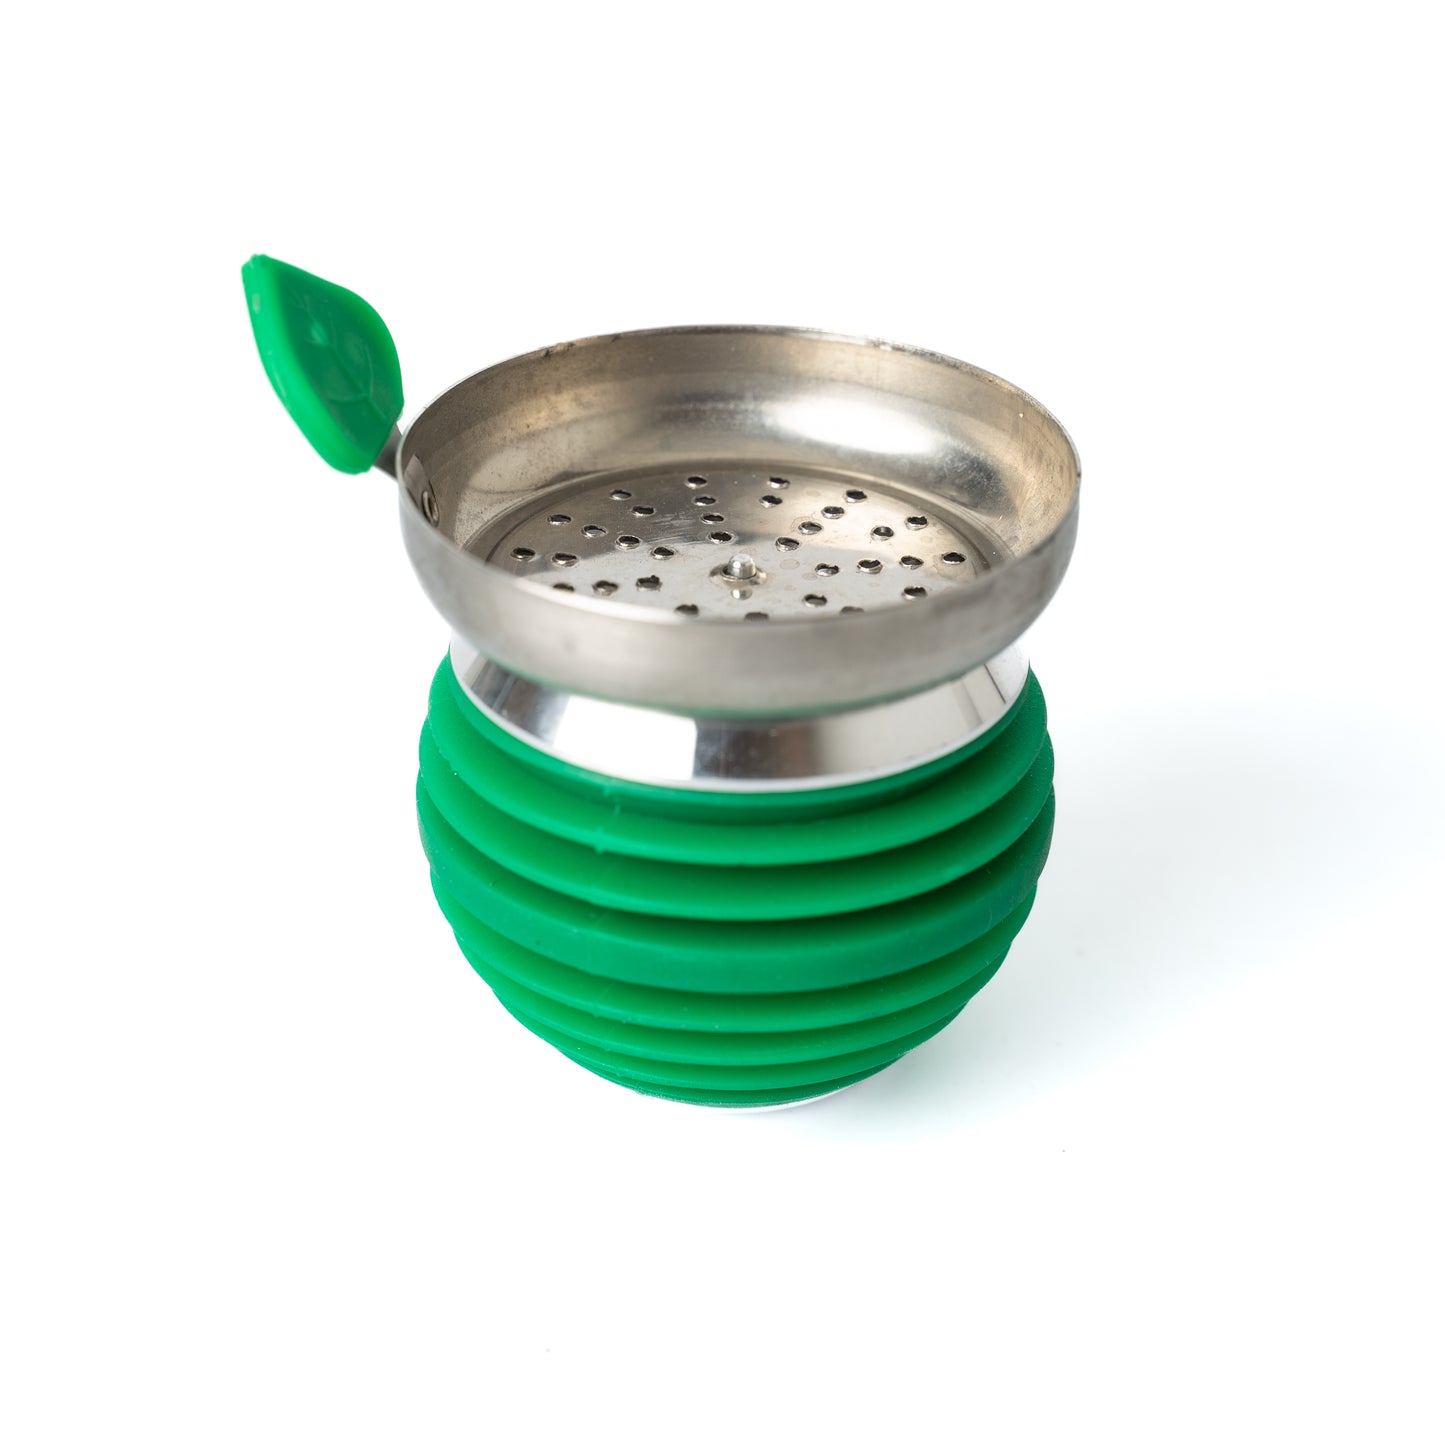 AOT Hookah Bowl with HMD - Green